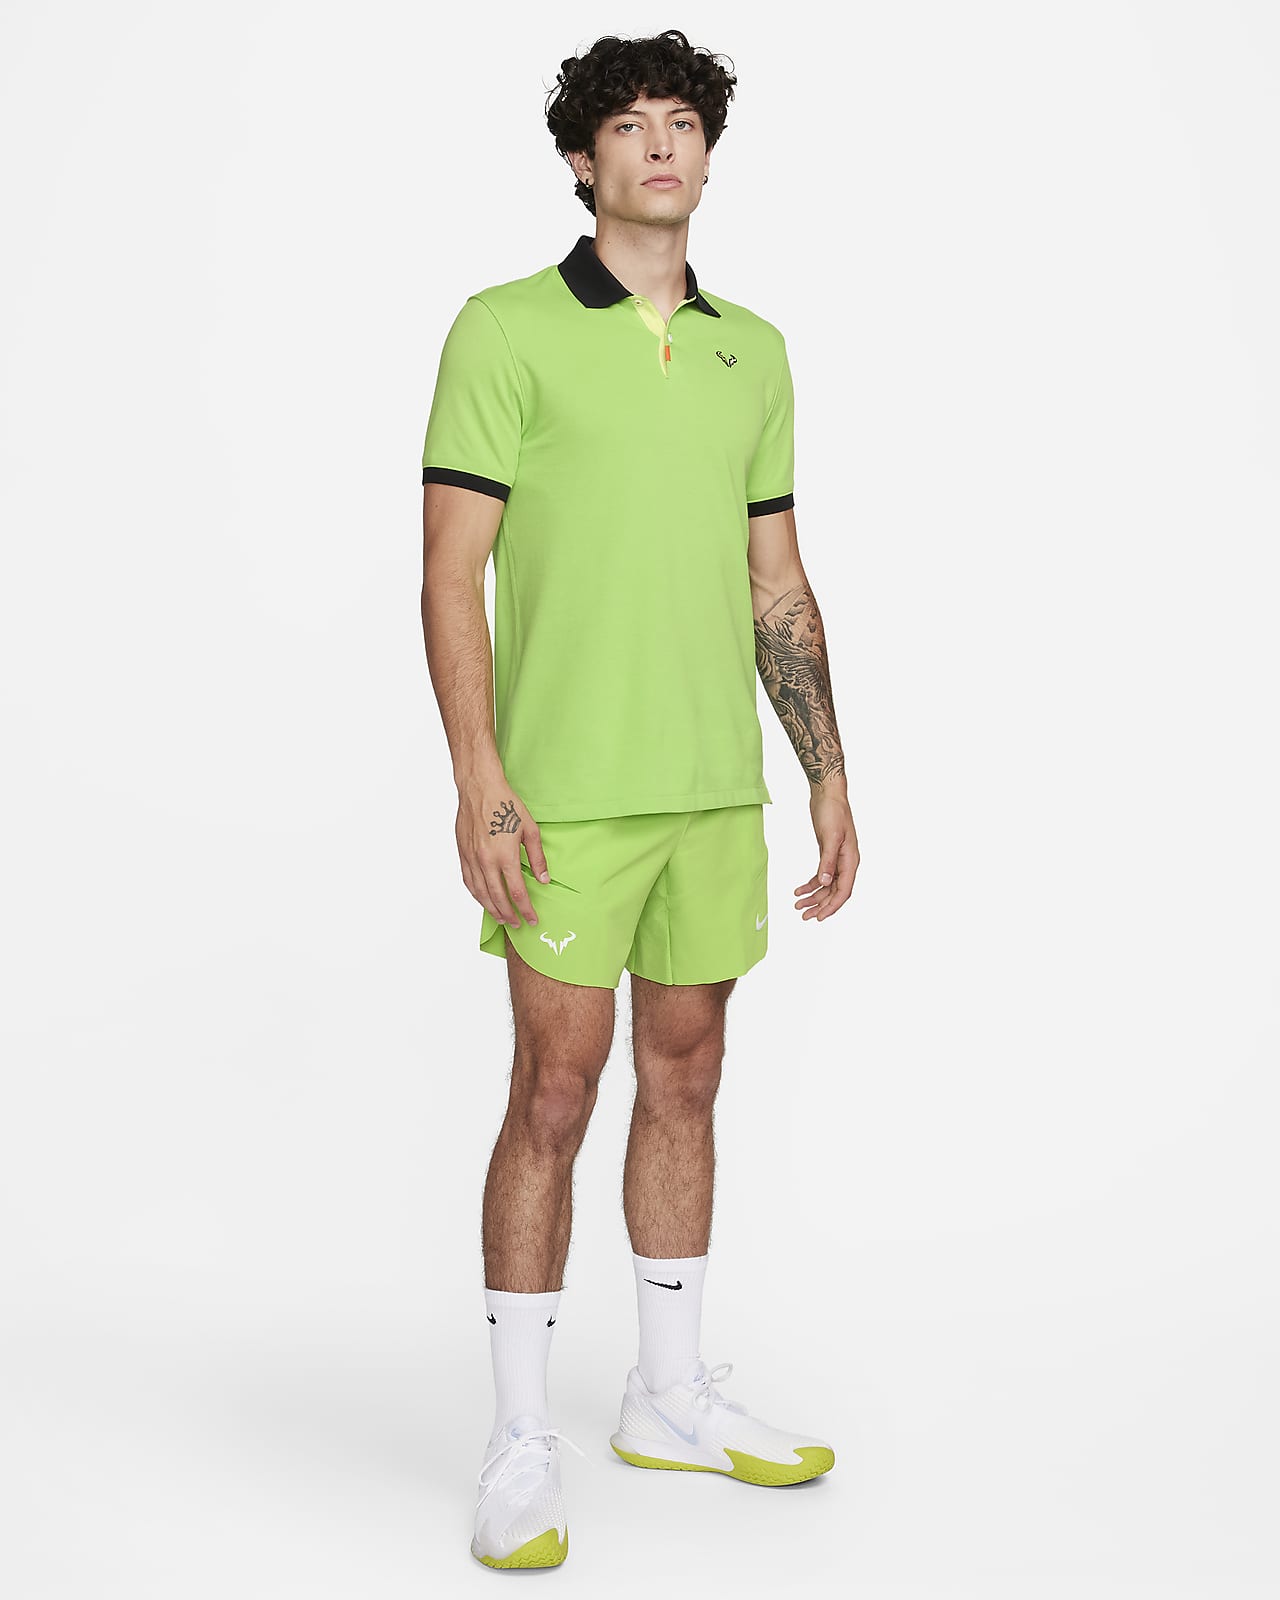 Lacoste L!ive Classic Polo Shirt in Orange for Men